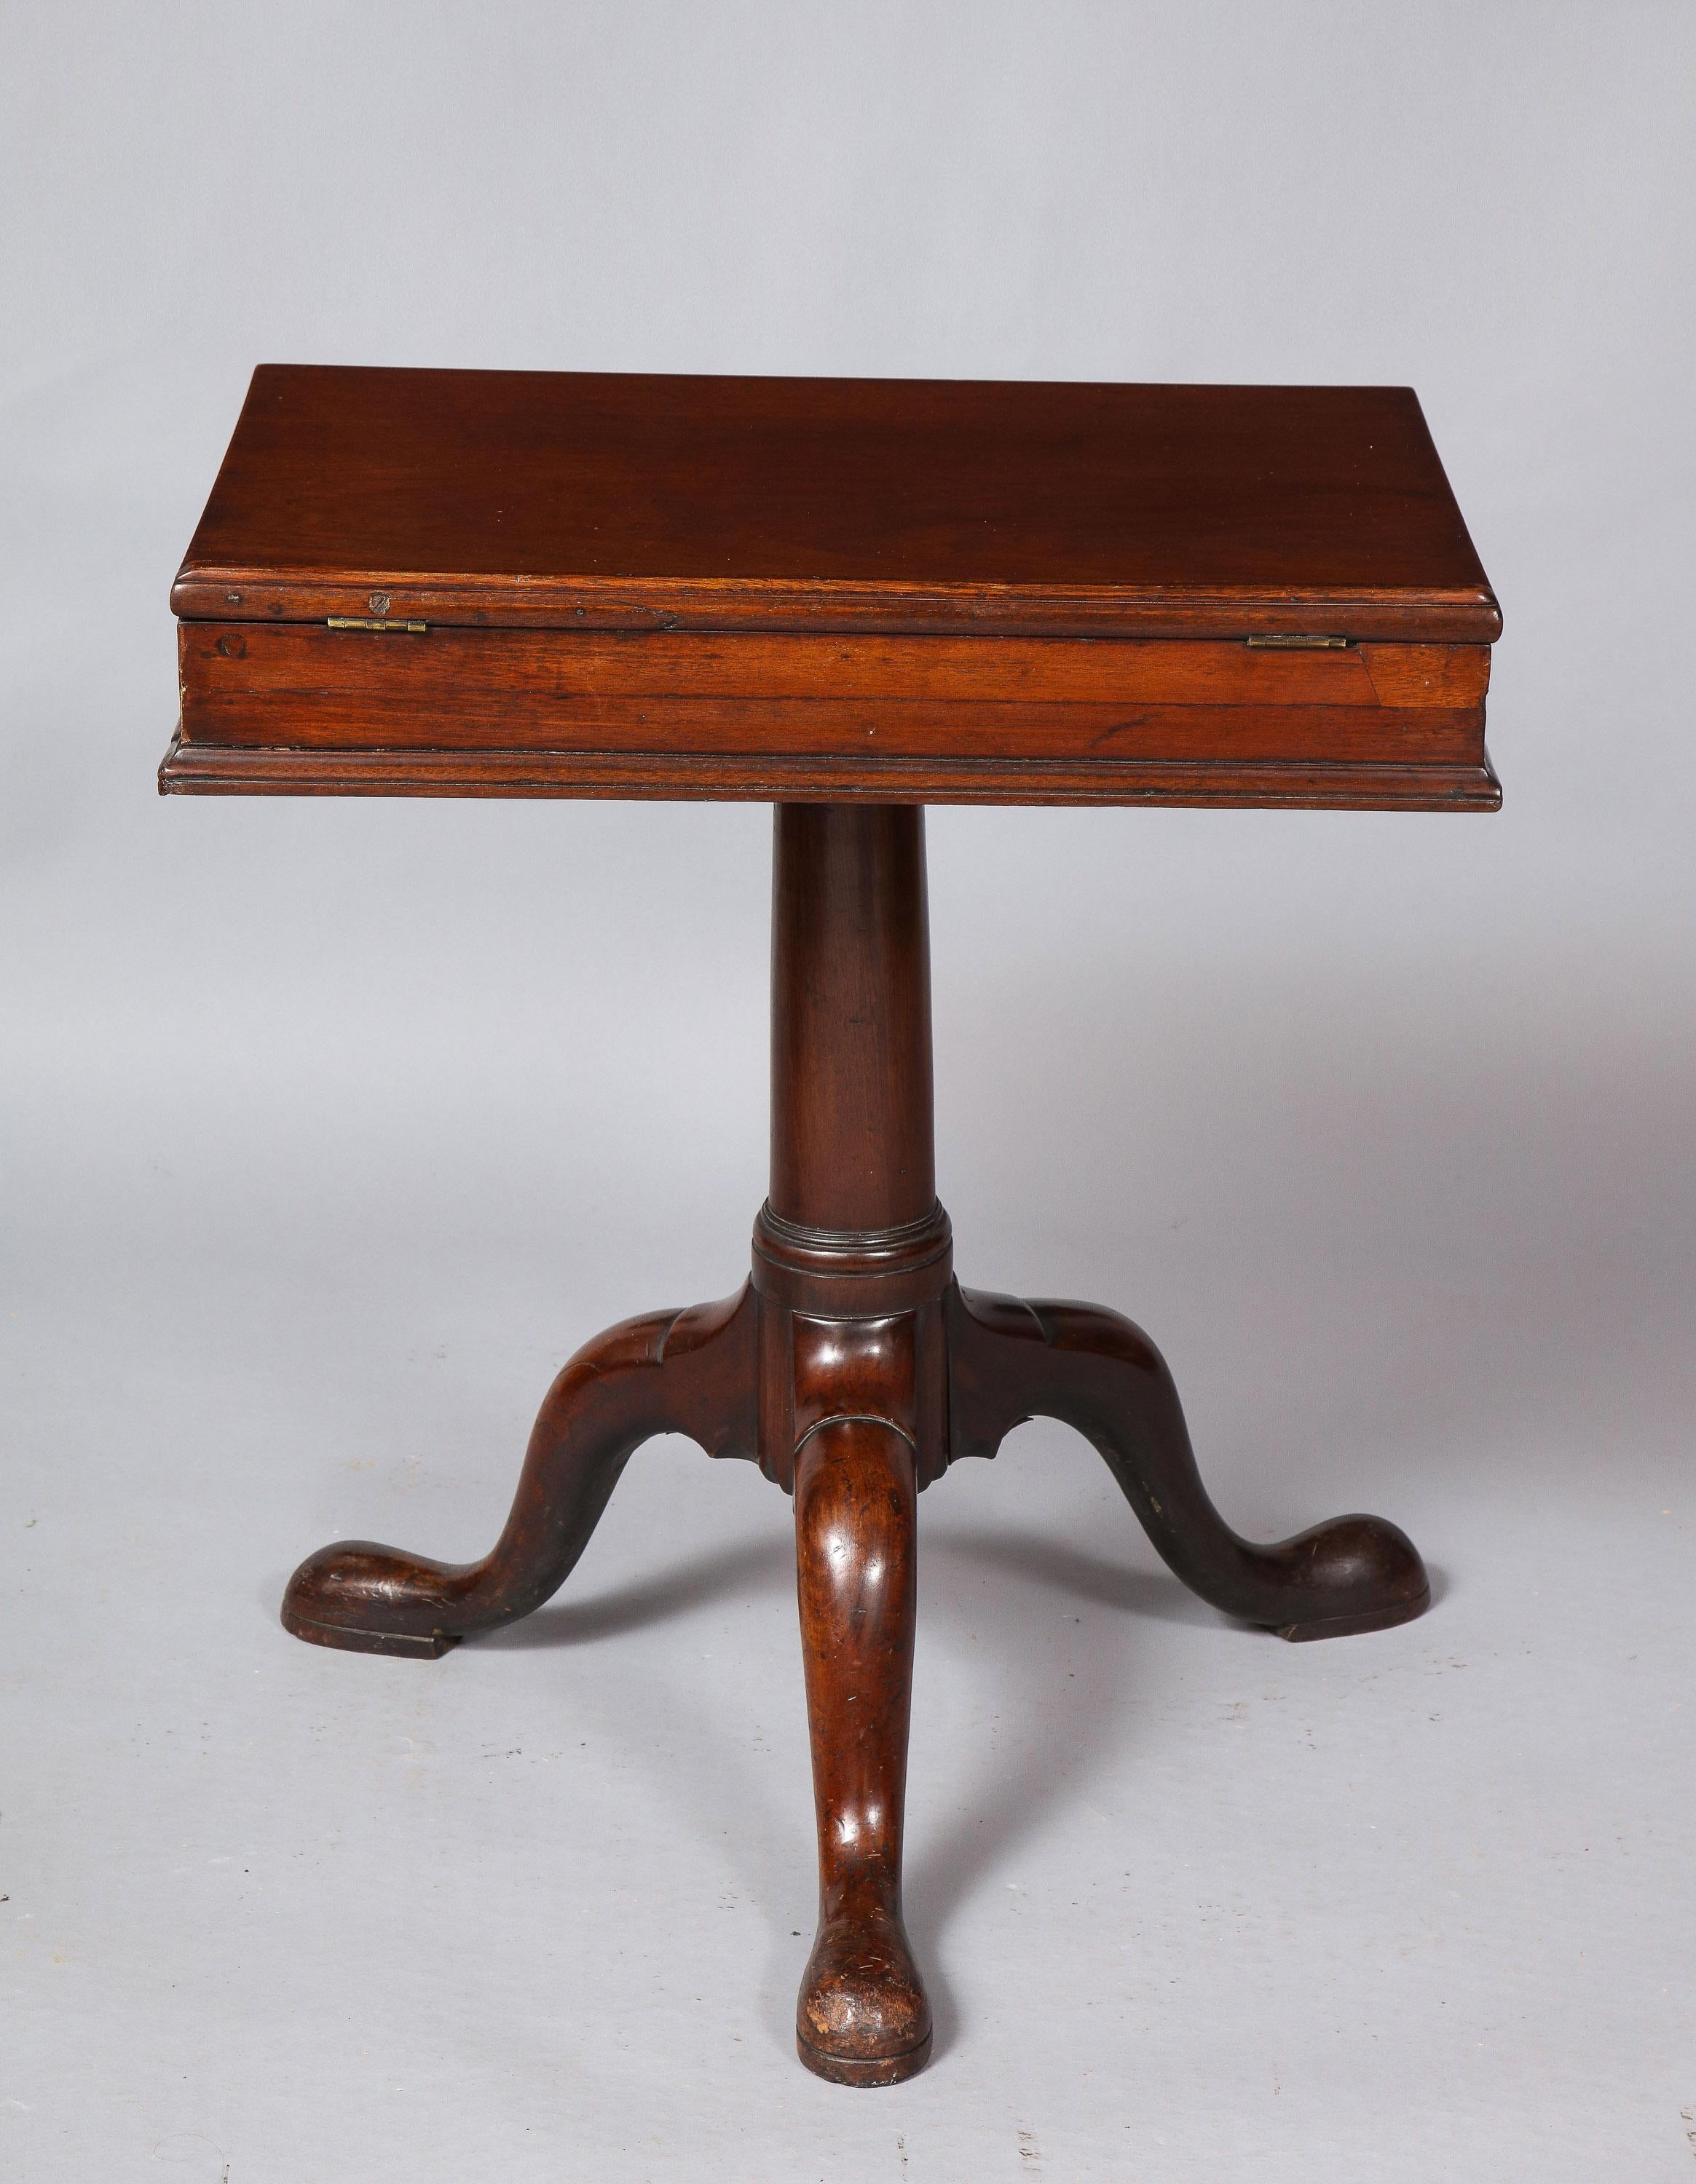 Wonderful and rare George II period solid mahogany library bookstand of excellent proportions having ratcheted adjustable top over two shallow drawers, standing on simple turned column shaft and standing on three cabriole legs ending in slipper